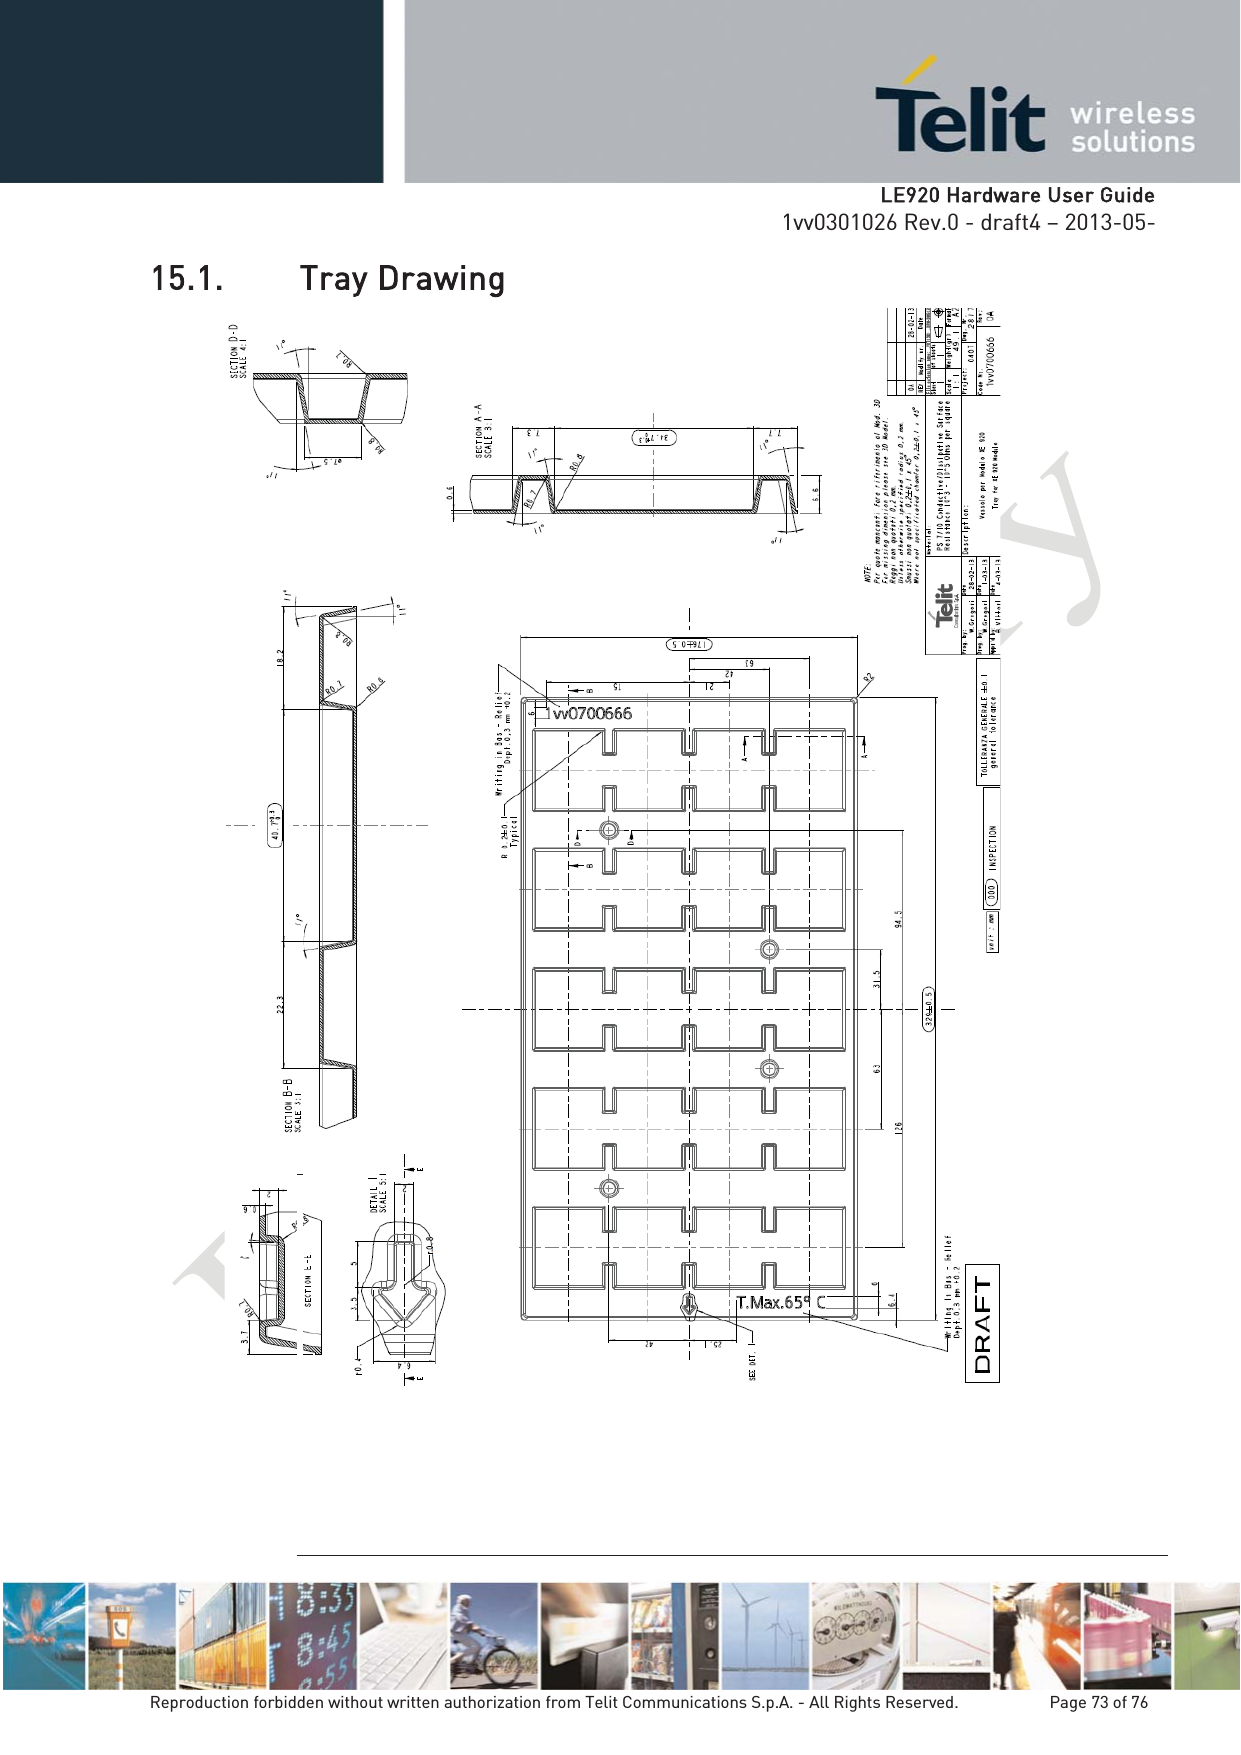   LLE920 Hardware User Guide1vv0301026 Rev.0 - draft4 – 2013-05-Reproduction forbidden without written authorization from Telit Communications S.p.A. - All Rights Reserved.    Page 73 of 76 15.1. Tray Drawing 